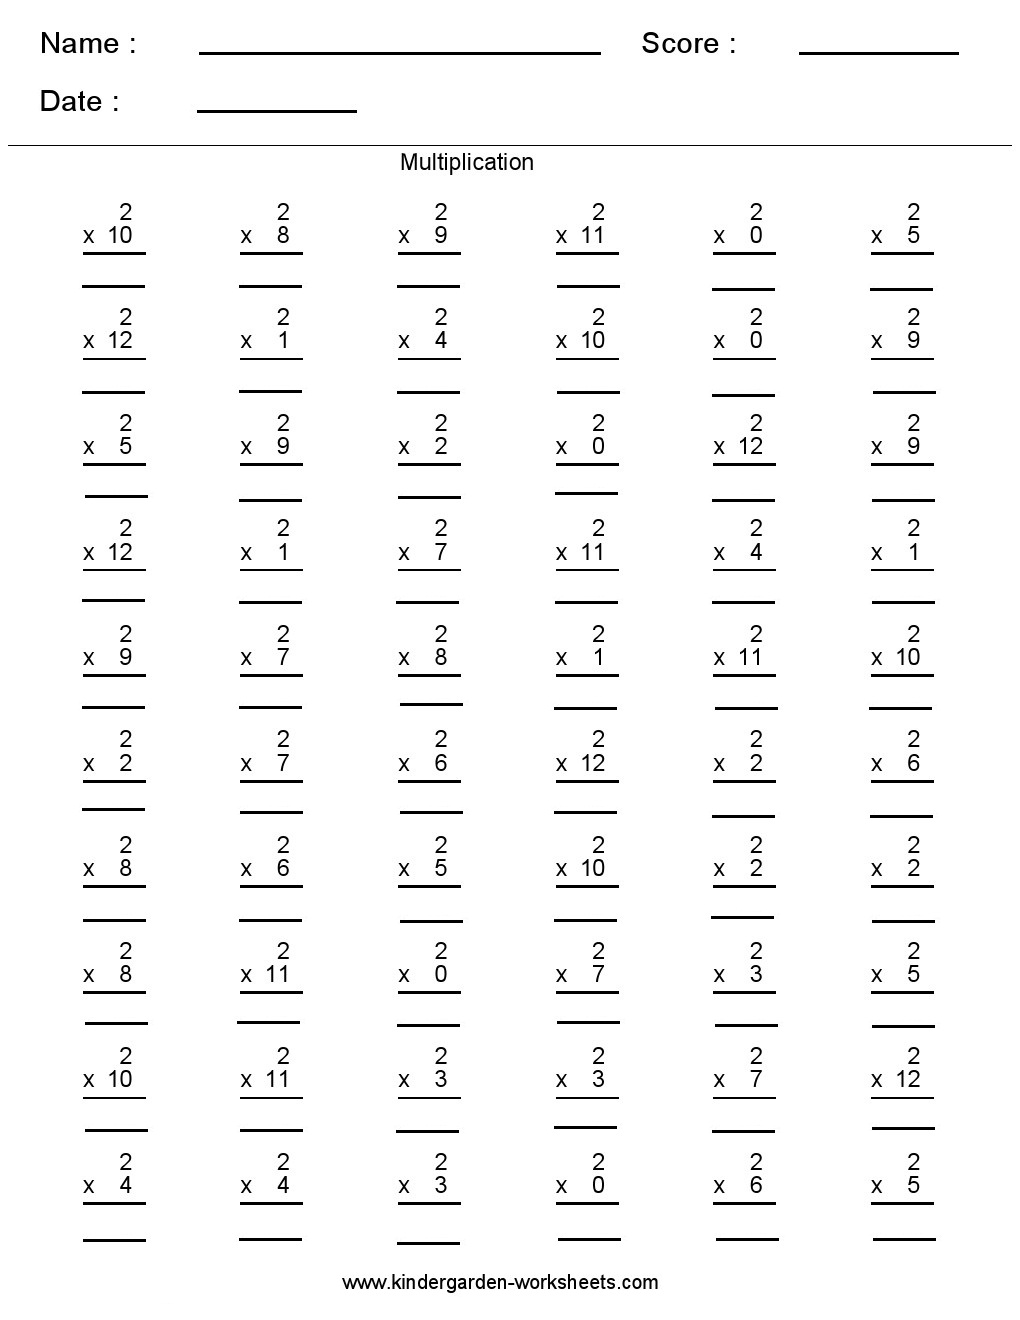 4 Best Images of 5th Grade Math Worksheets Multiplication Printable 5th ...